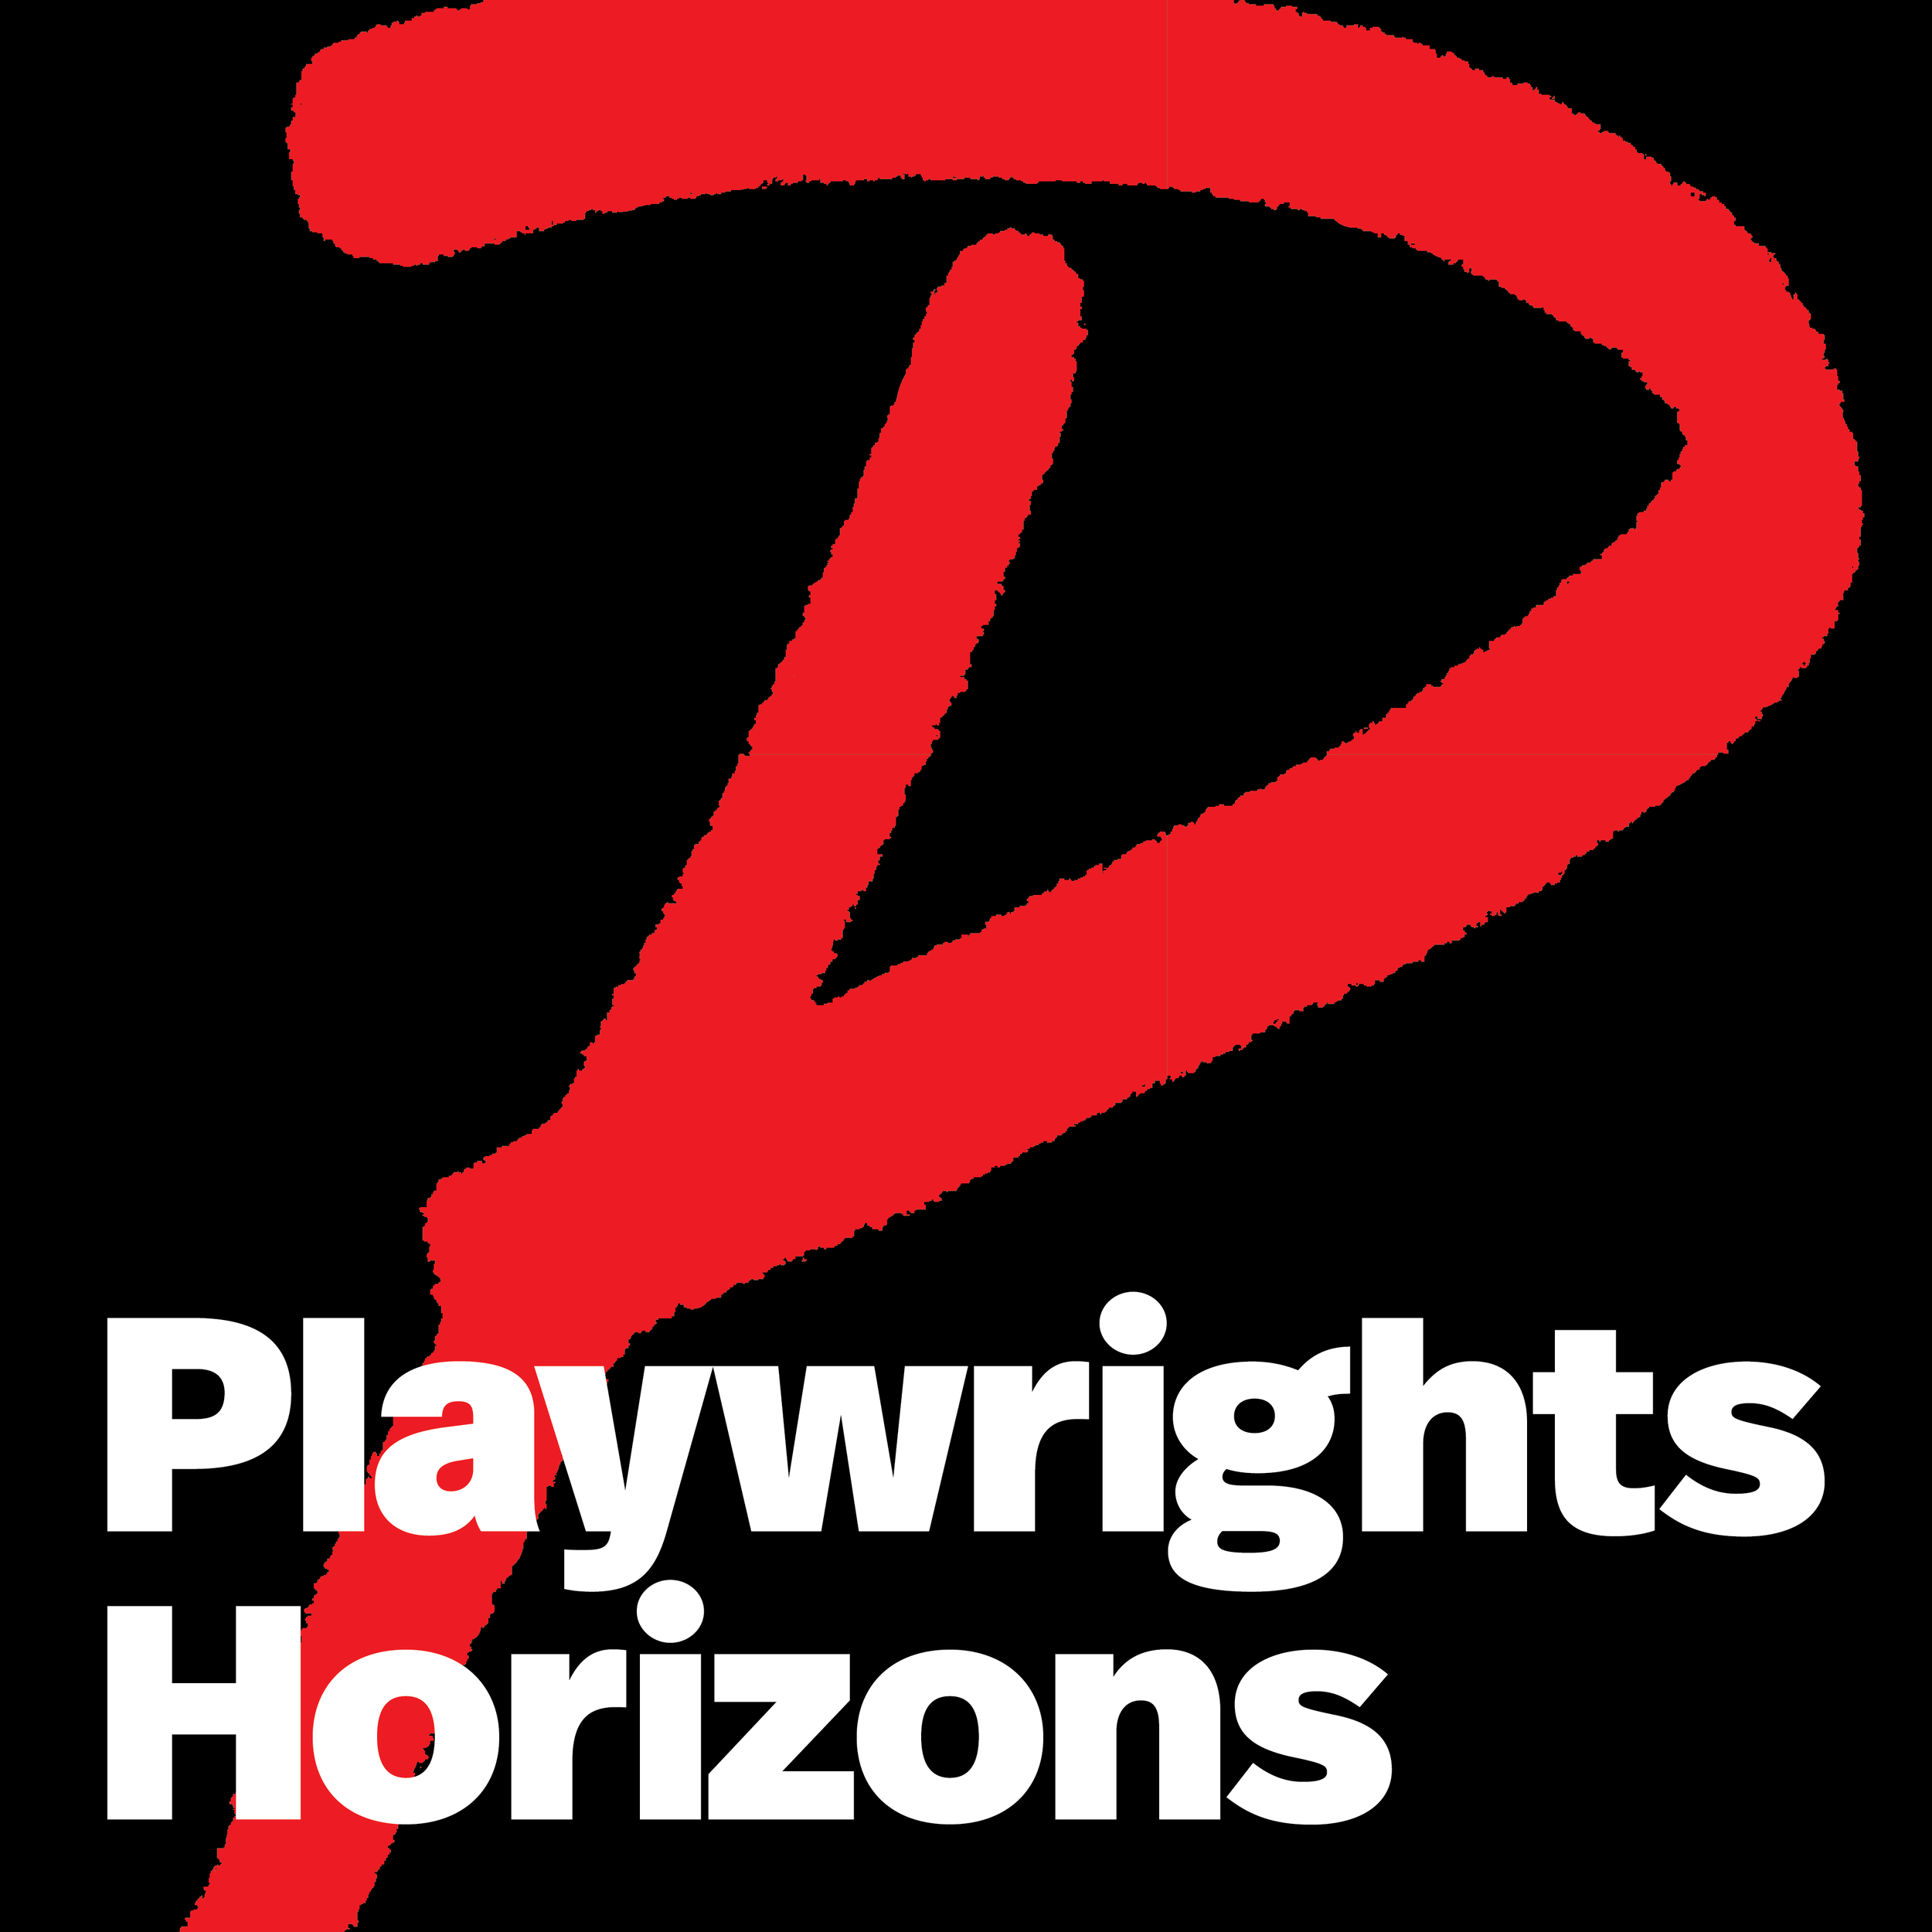 playwrights_logo-square-3.png